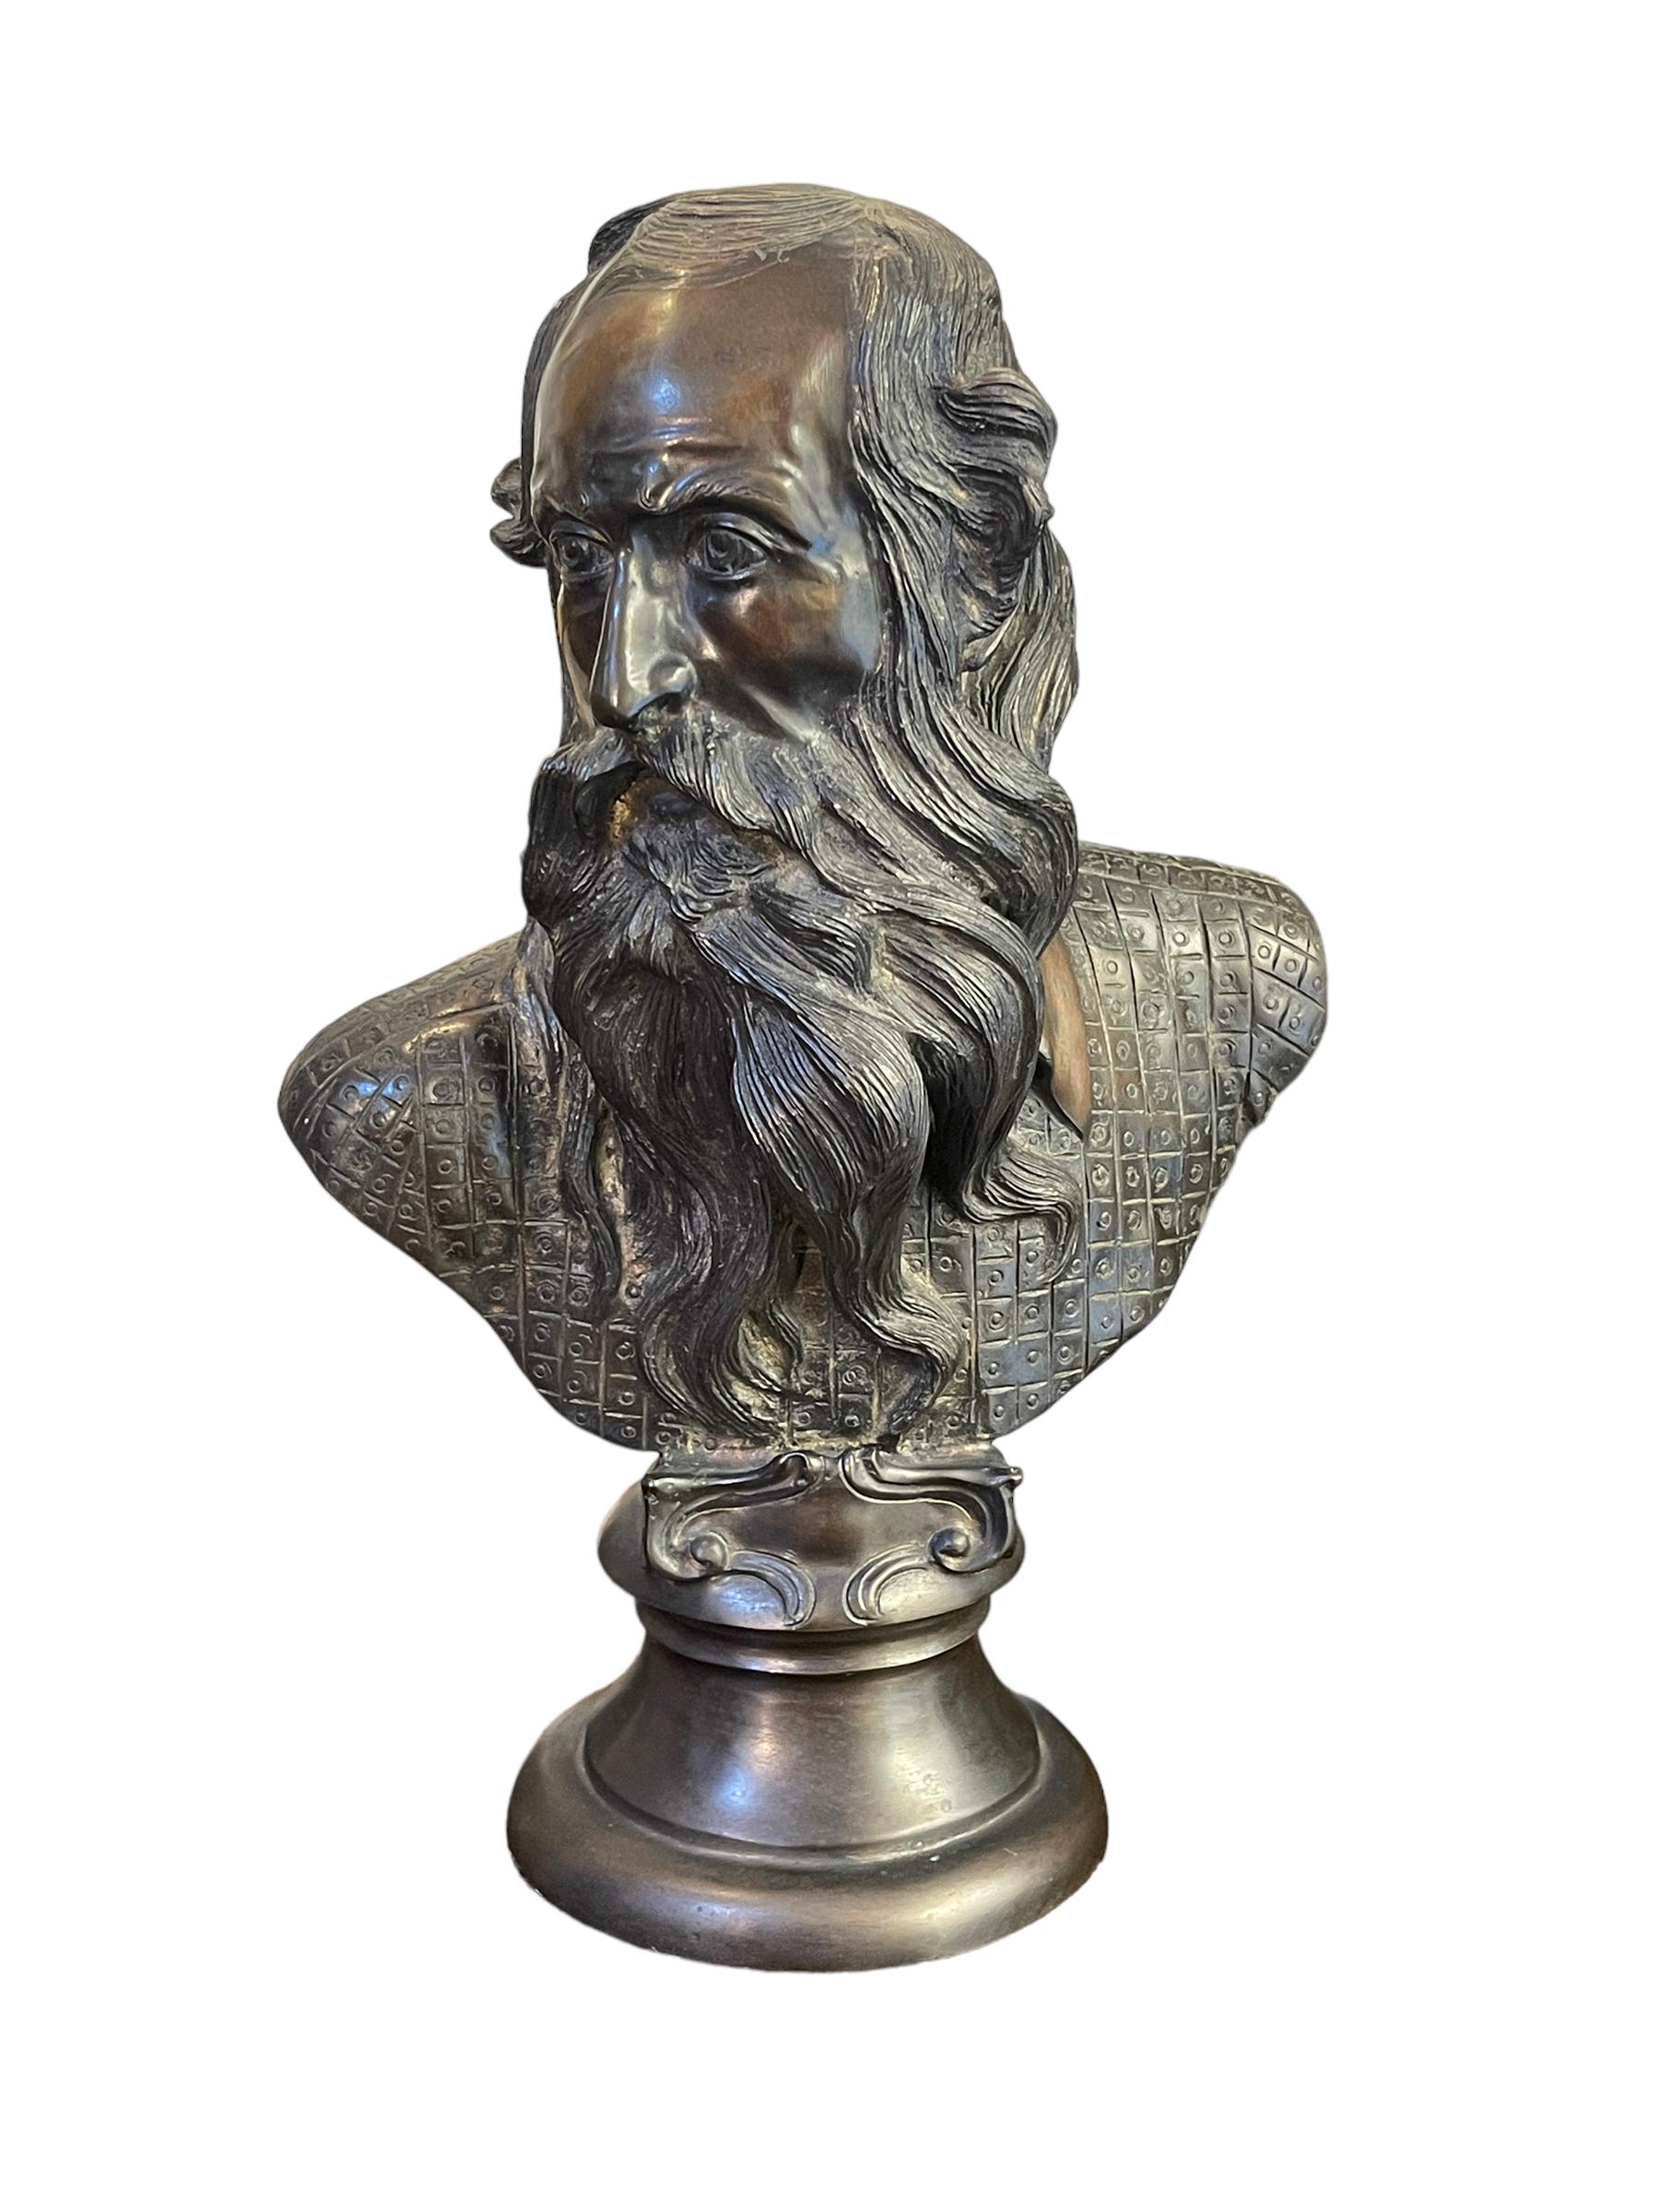 Bronze sculpture, self-portrait, Gemito, 19th century
Elegant half bust in bronze made and signed by the sculptor Gemito, from the second half of the 1800s depicting himself.
Material: bronze
Very good condition
Measurements: 21x14 cm, height 32